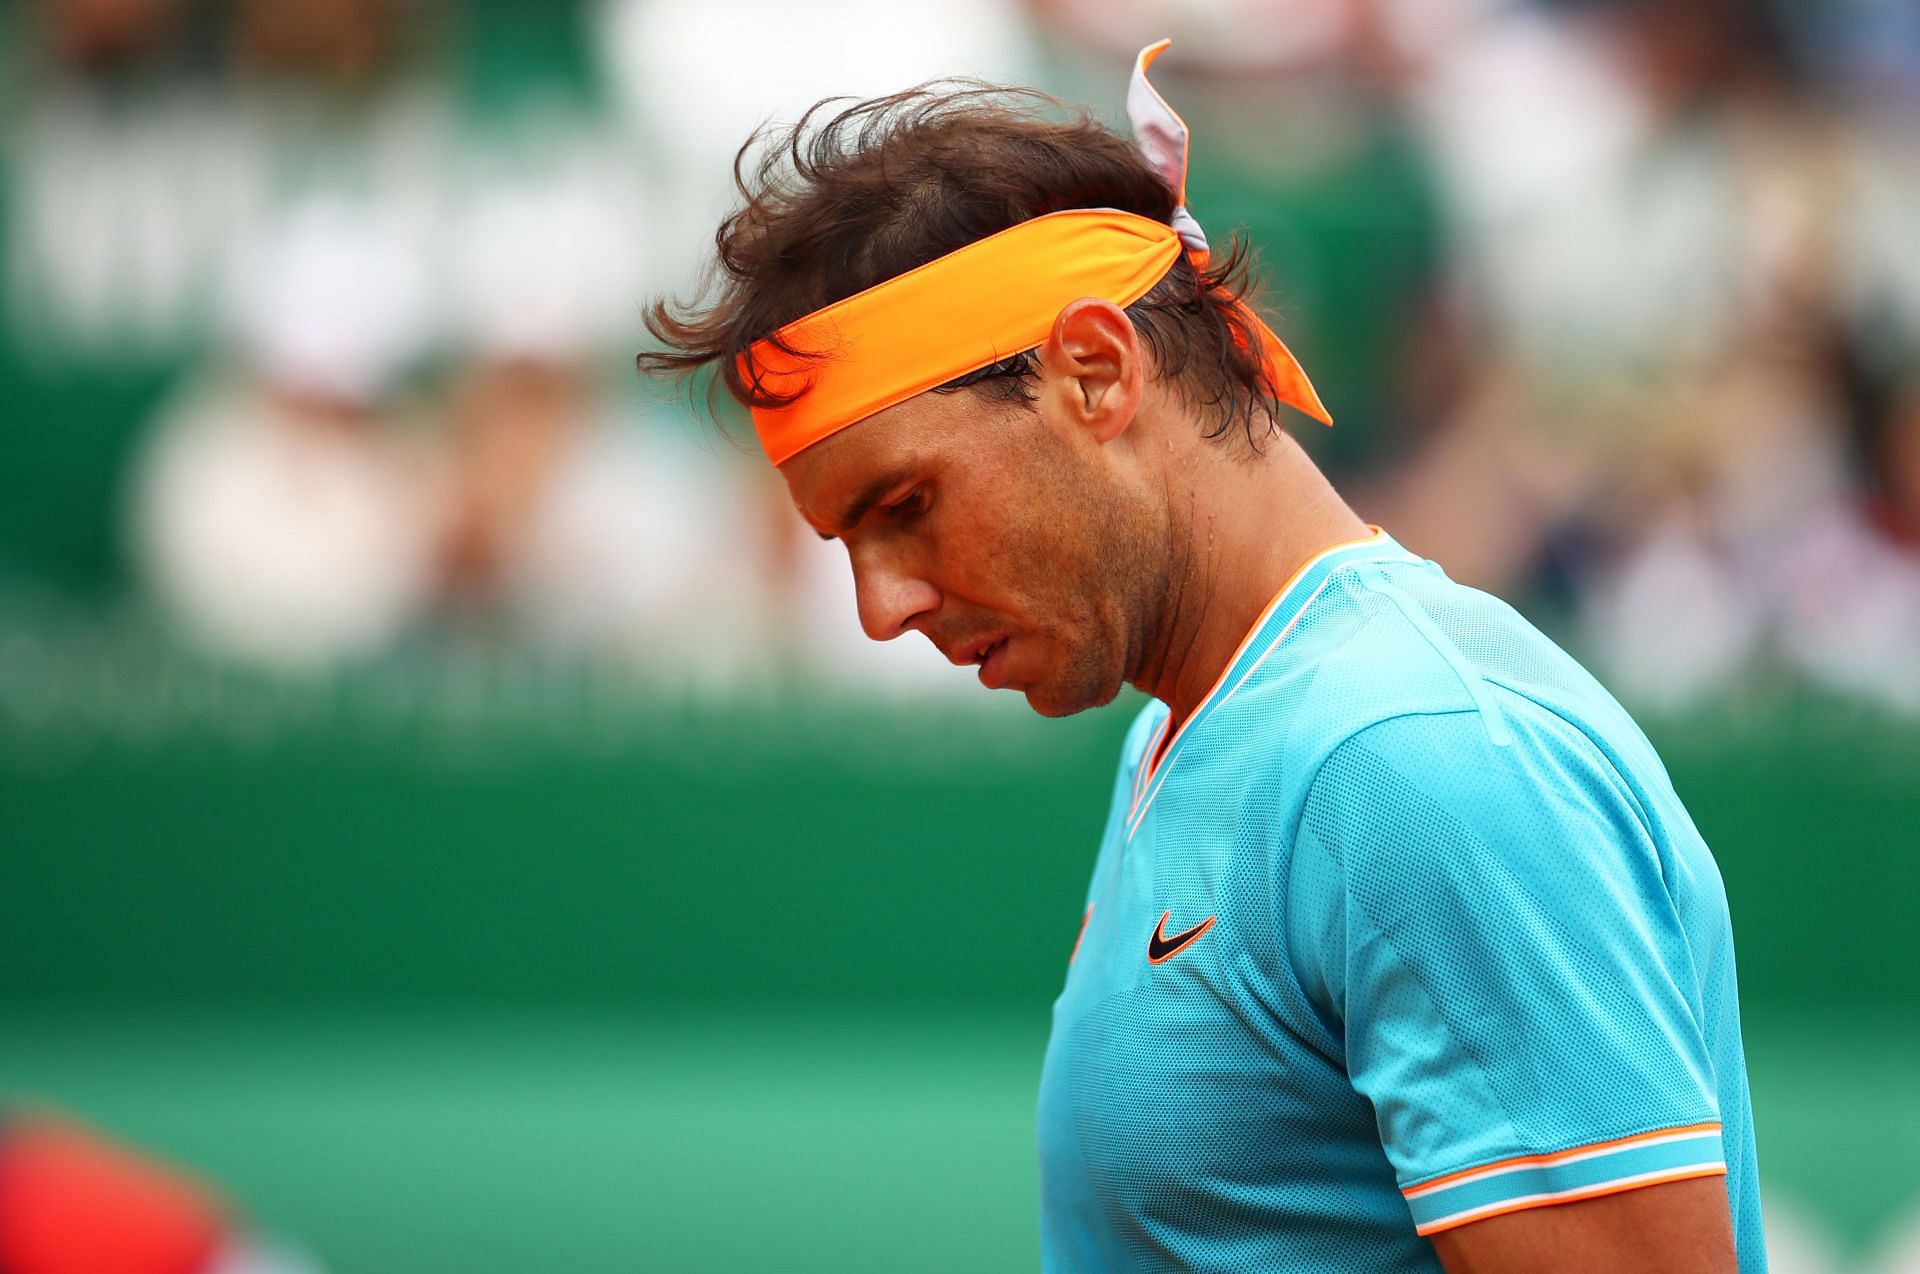 Few tennis records will be a mammoth task for Rafael Nadal